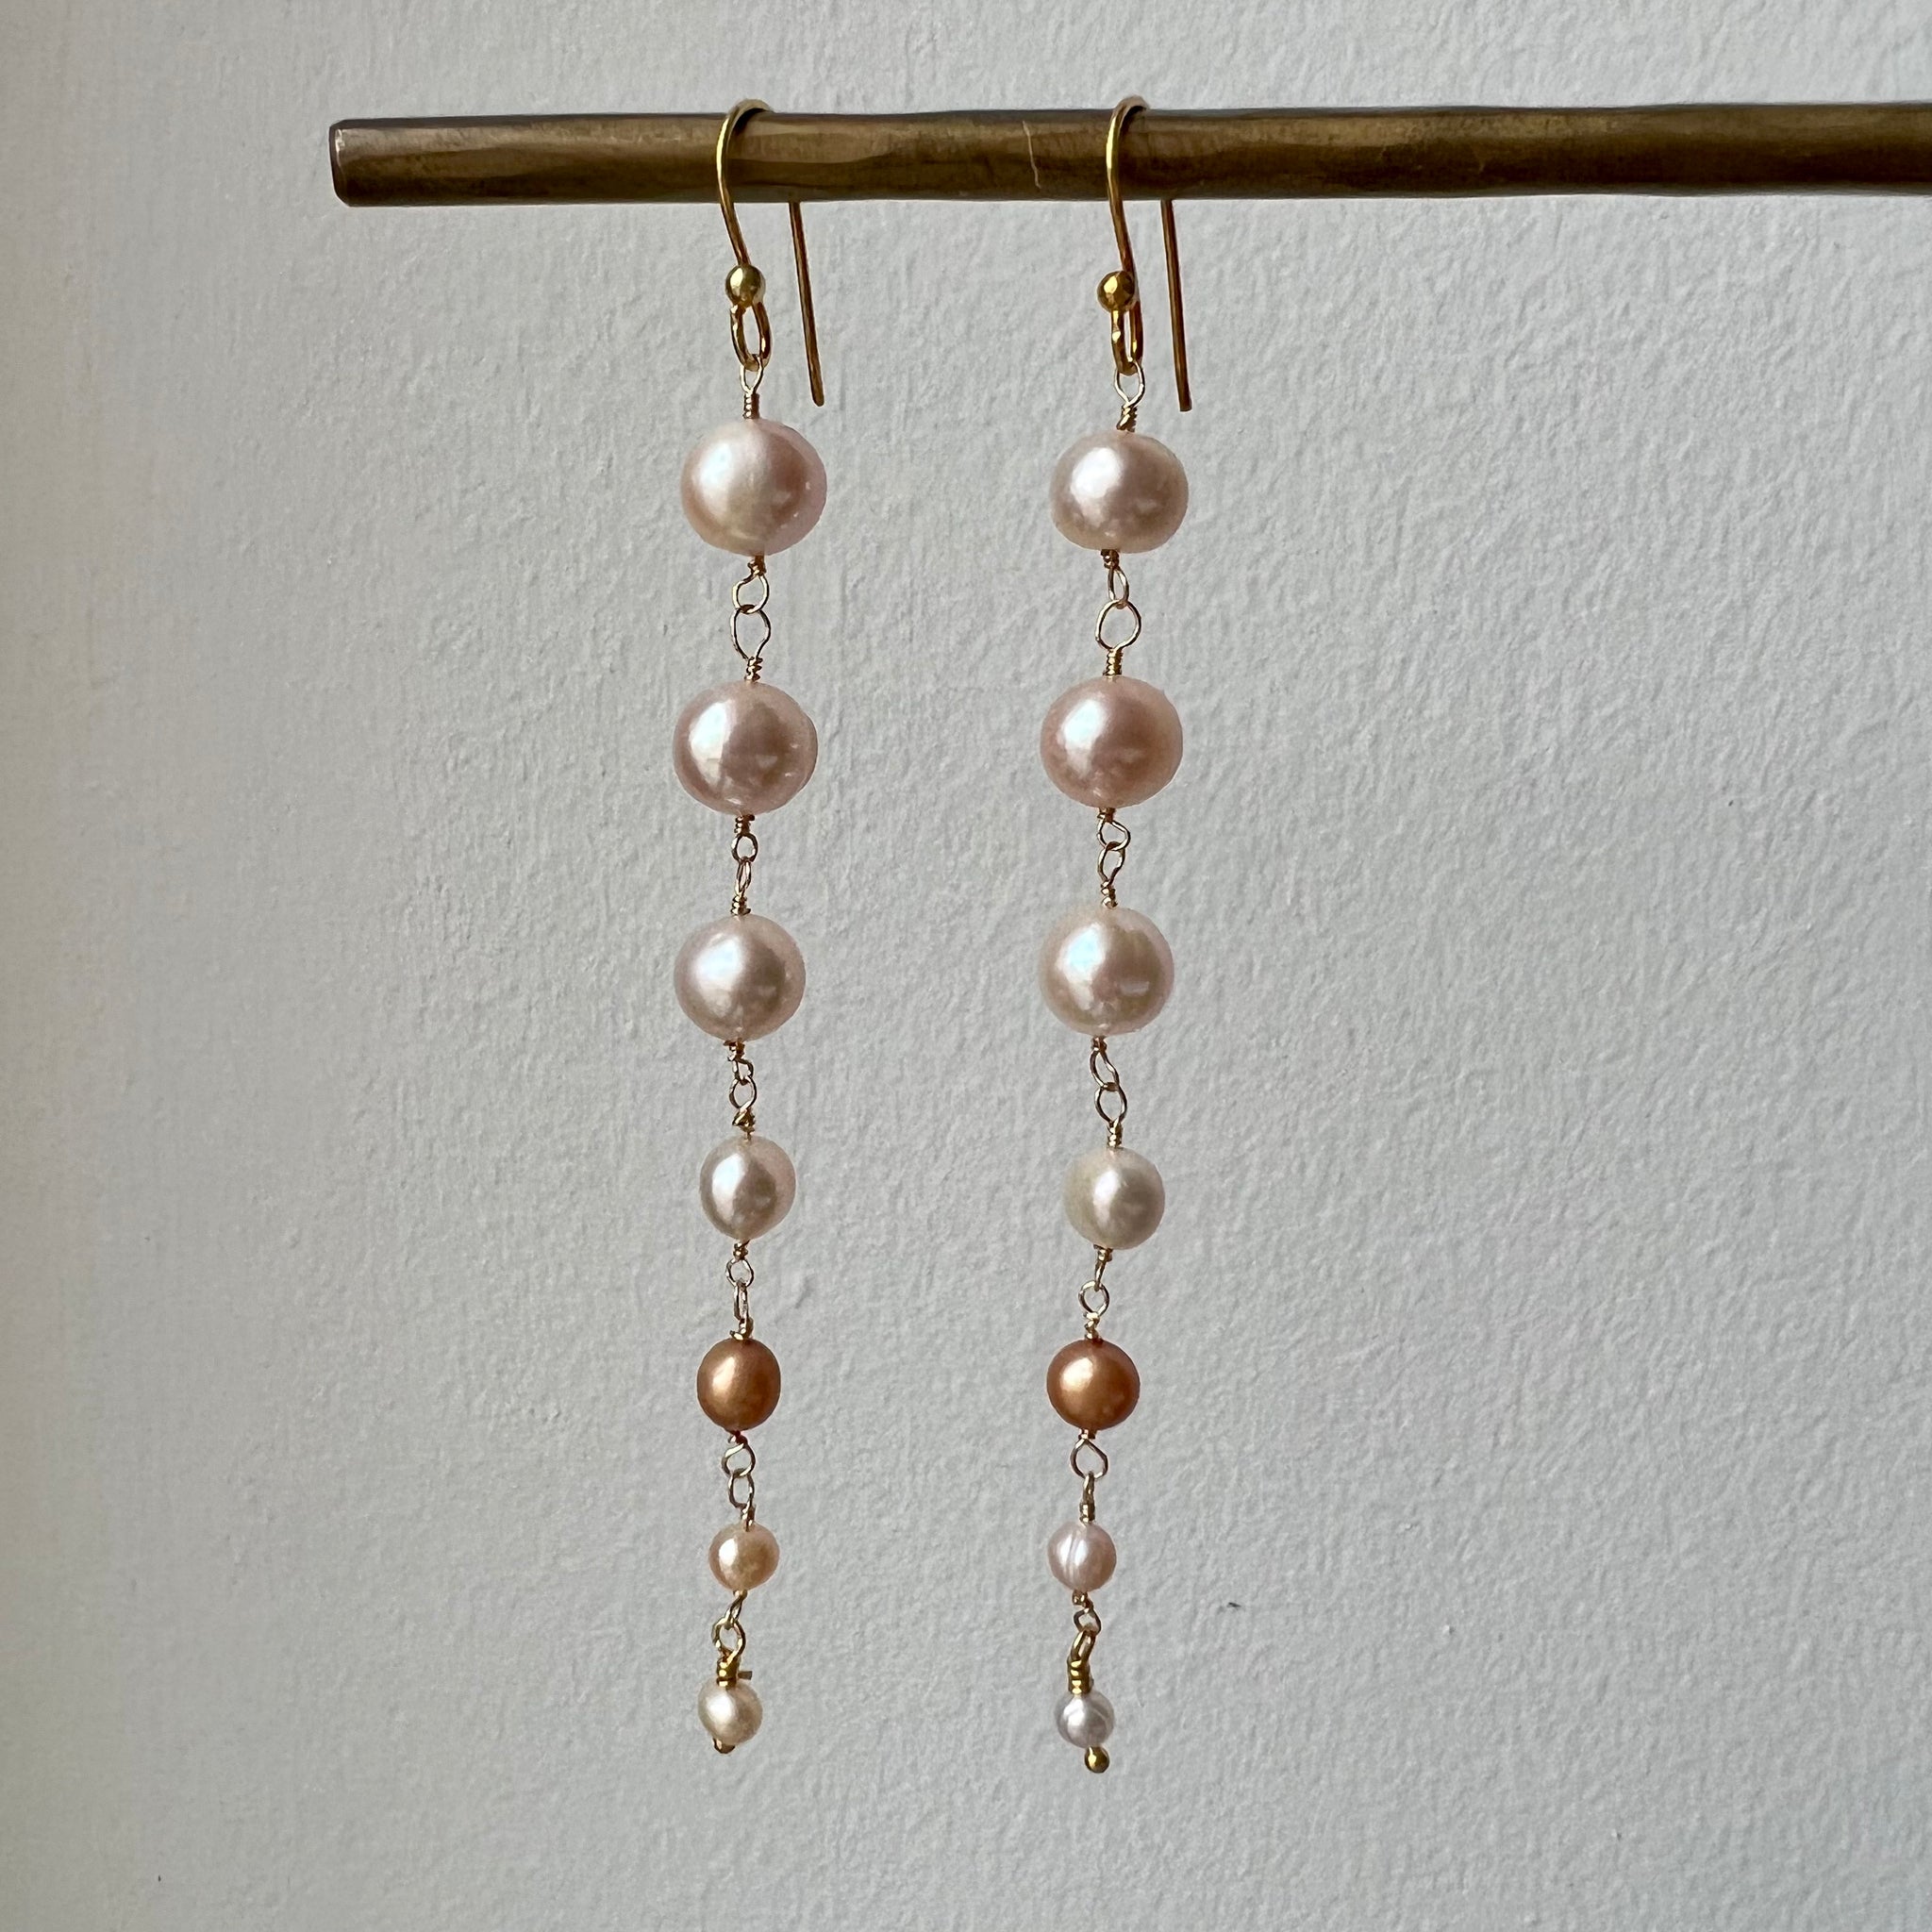 Graduated Size White, Pink, Cream Fresh Water Pearl Earring